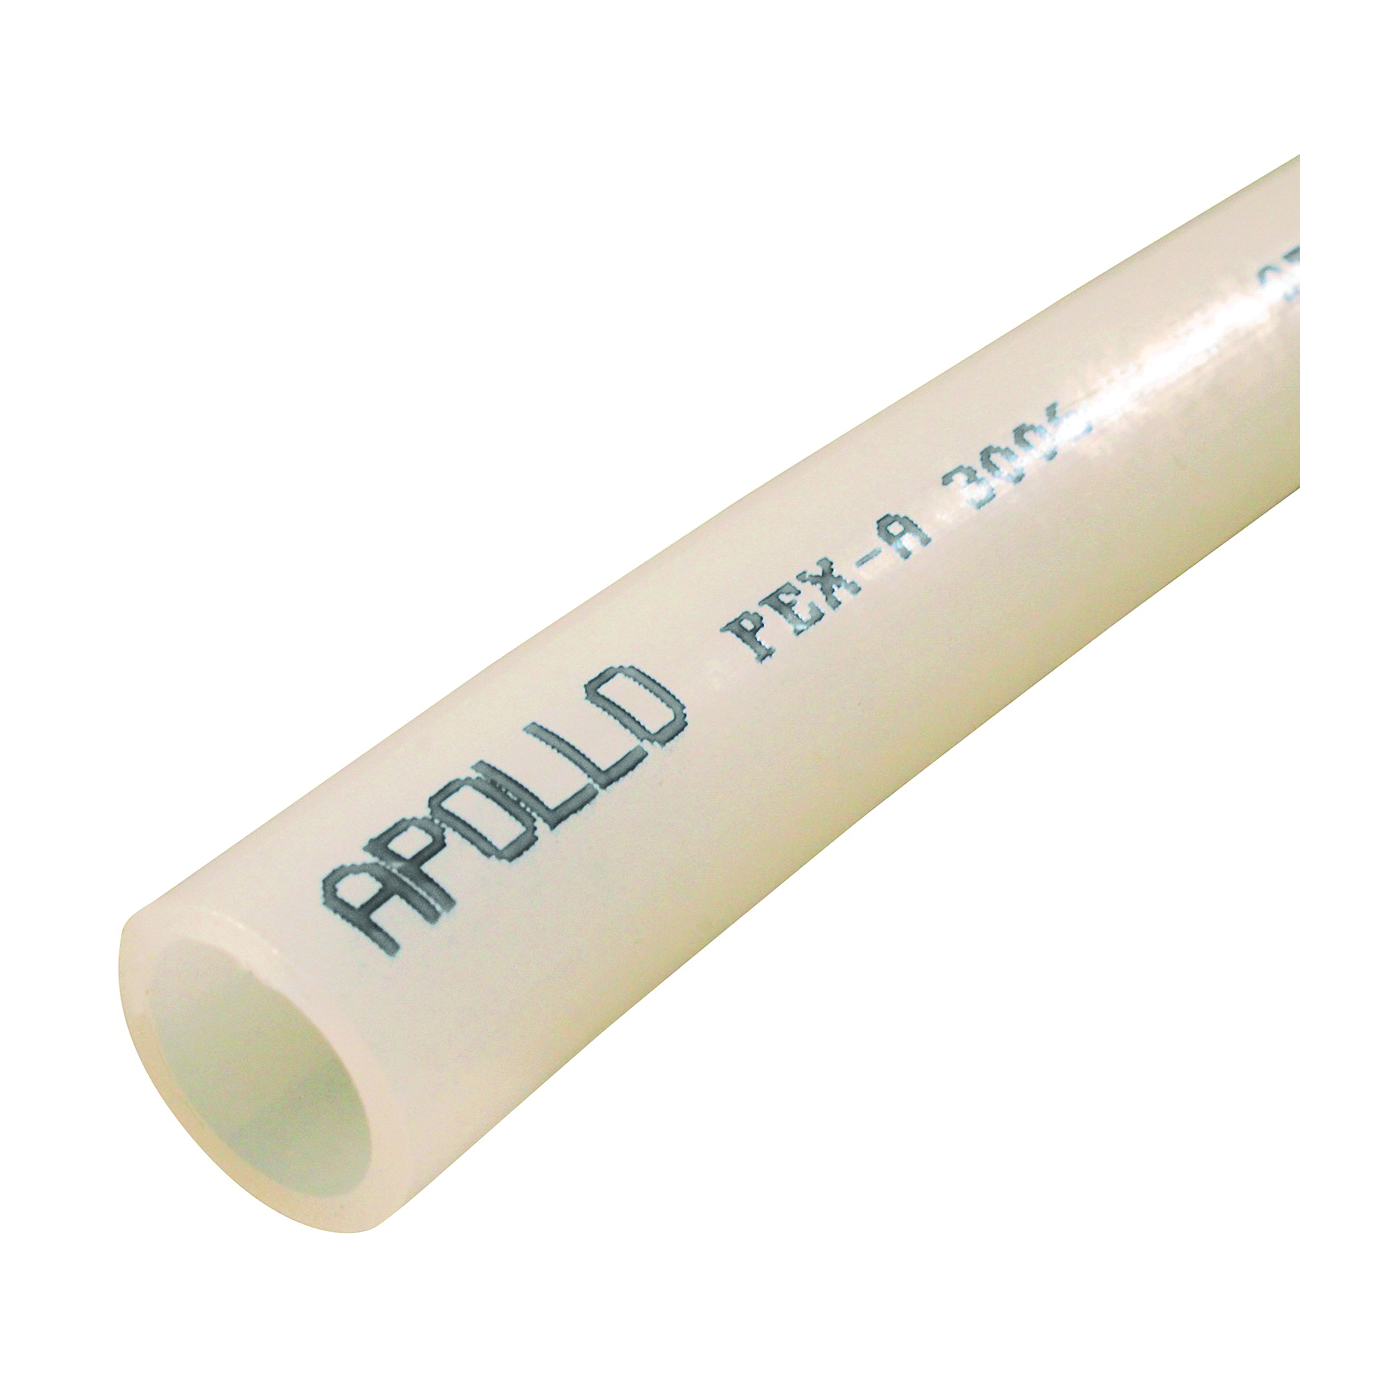 EPPW3001 PEX-A Pipe Tubing, 1 in, Opaque, 300 ft L